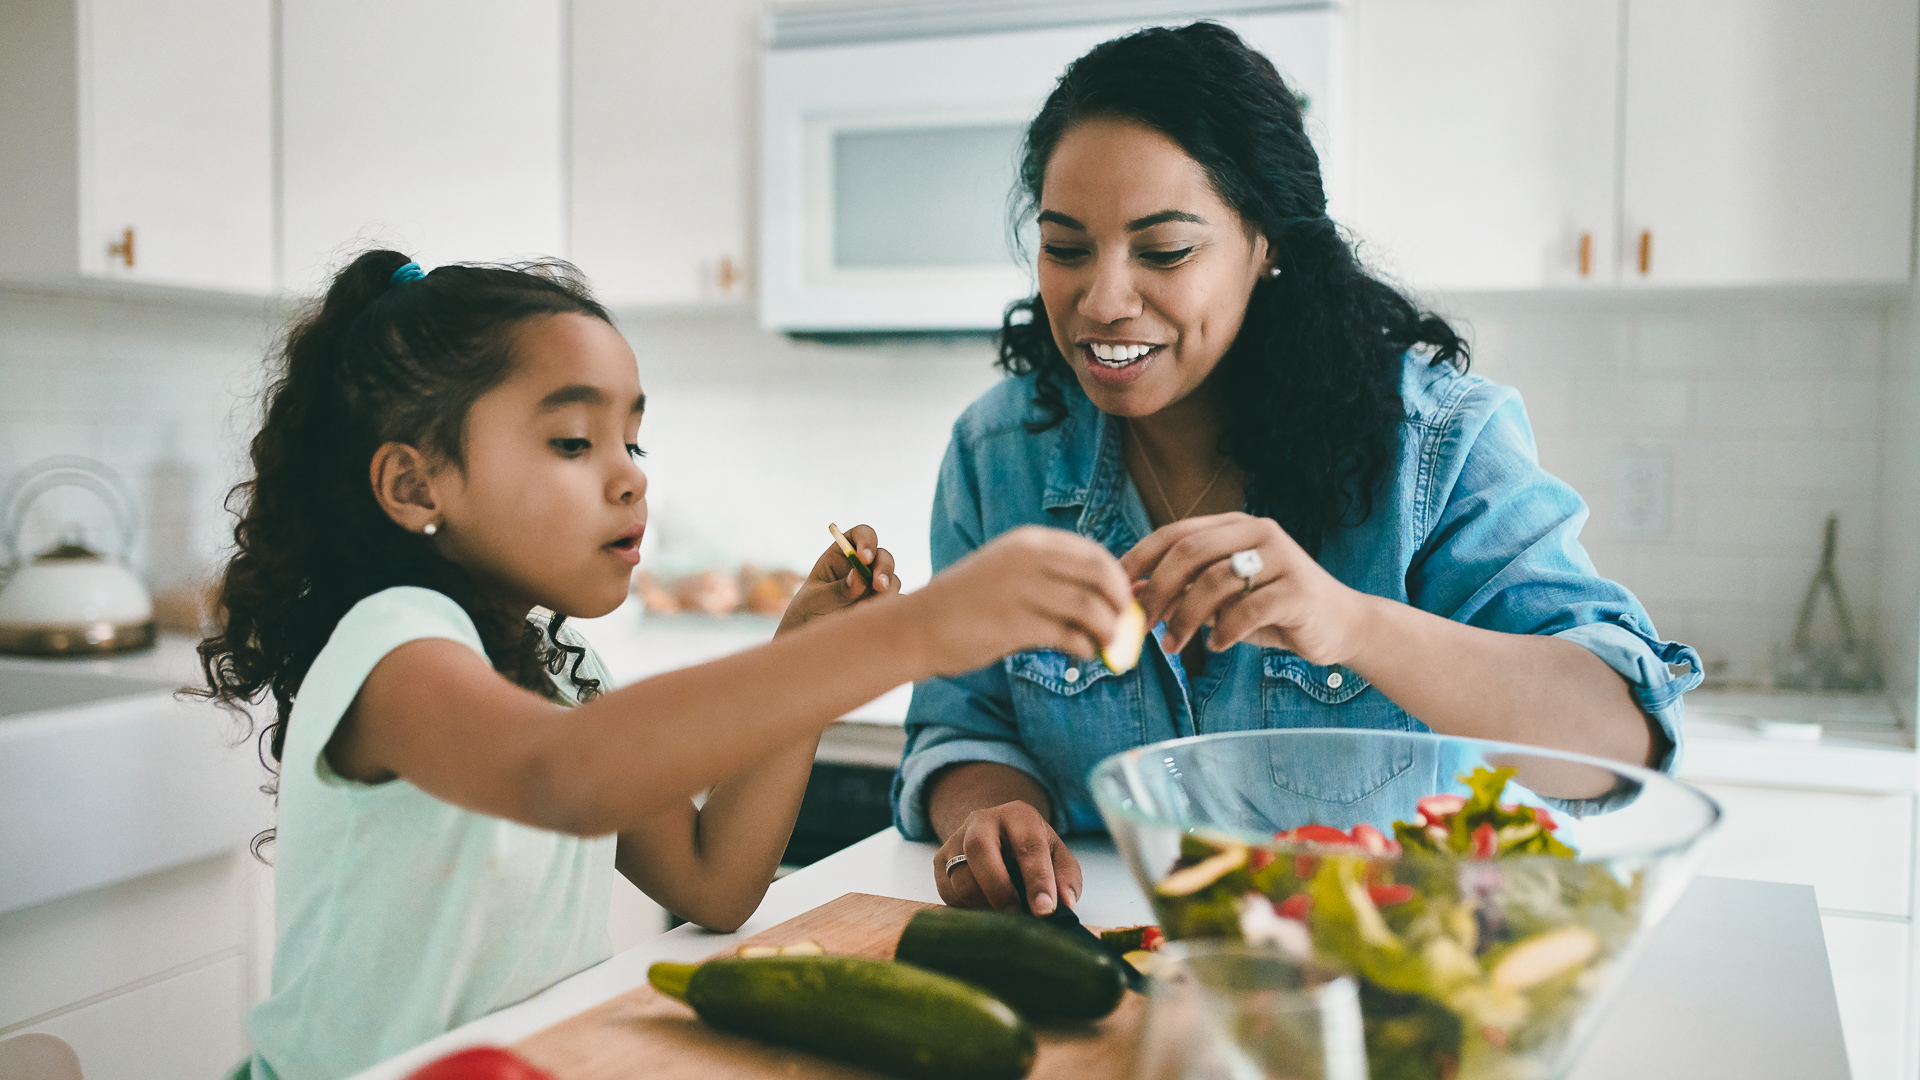 https://cdn.gobankingrates.com/wp-content/uploads/2020/05/mother-and-daughter-cooking-at-home-iStock-1127294863.jpg